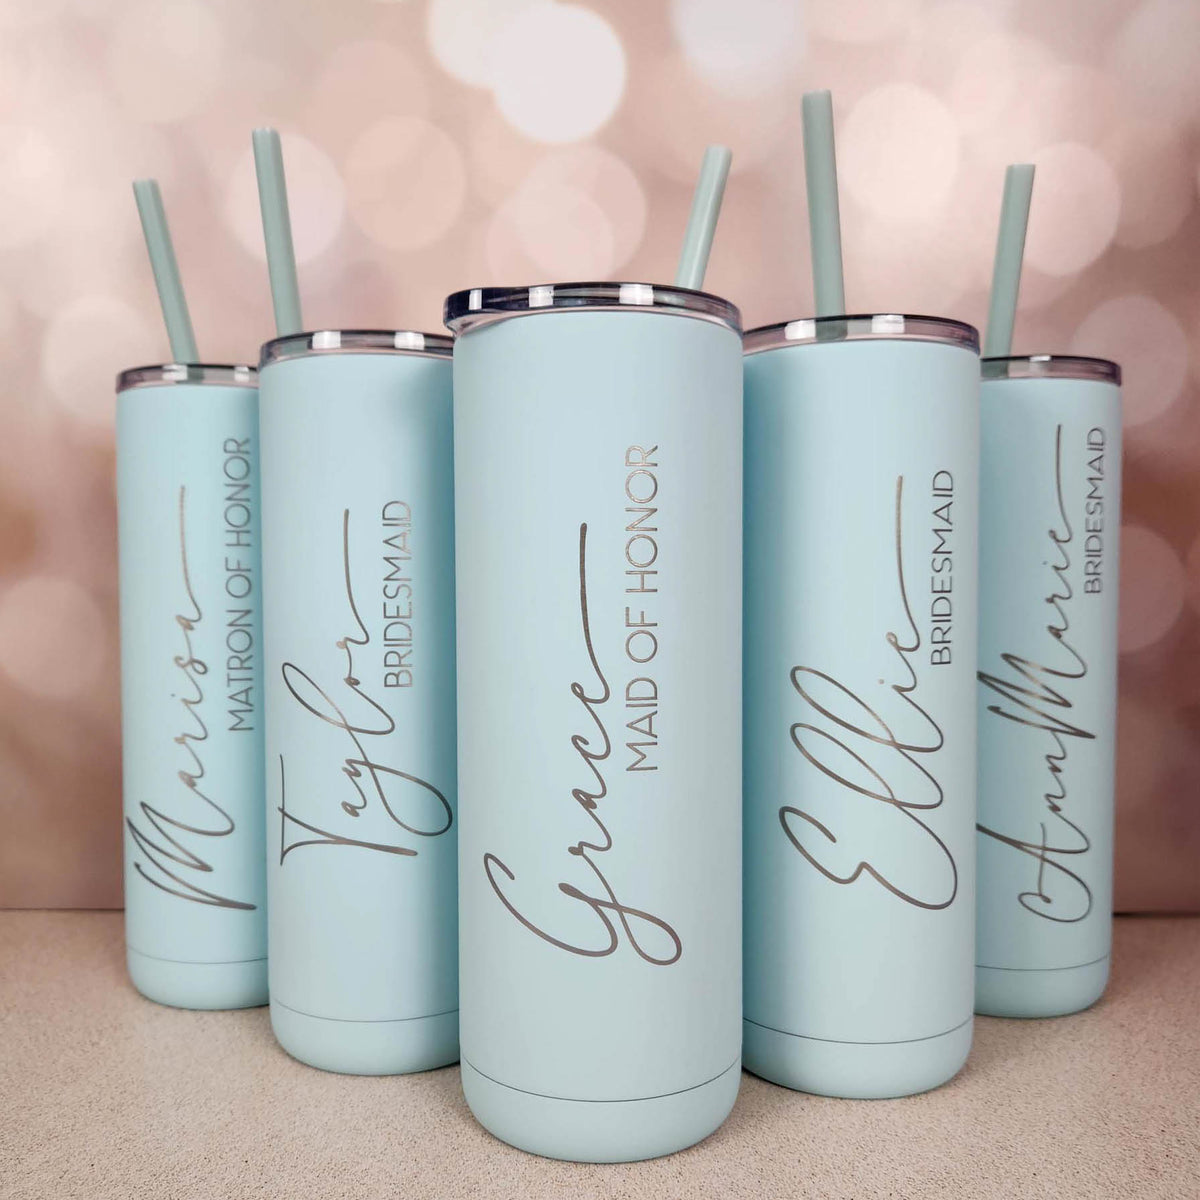 Personalized Bridesmaid Stainless Steel Tumblers